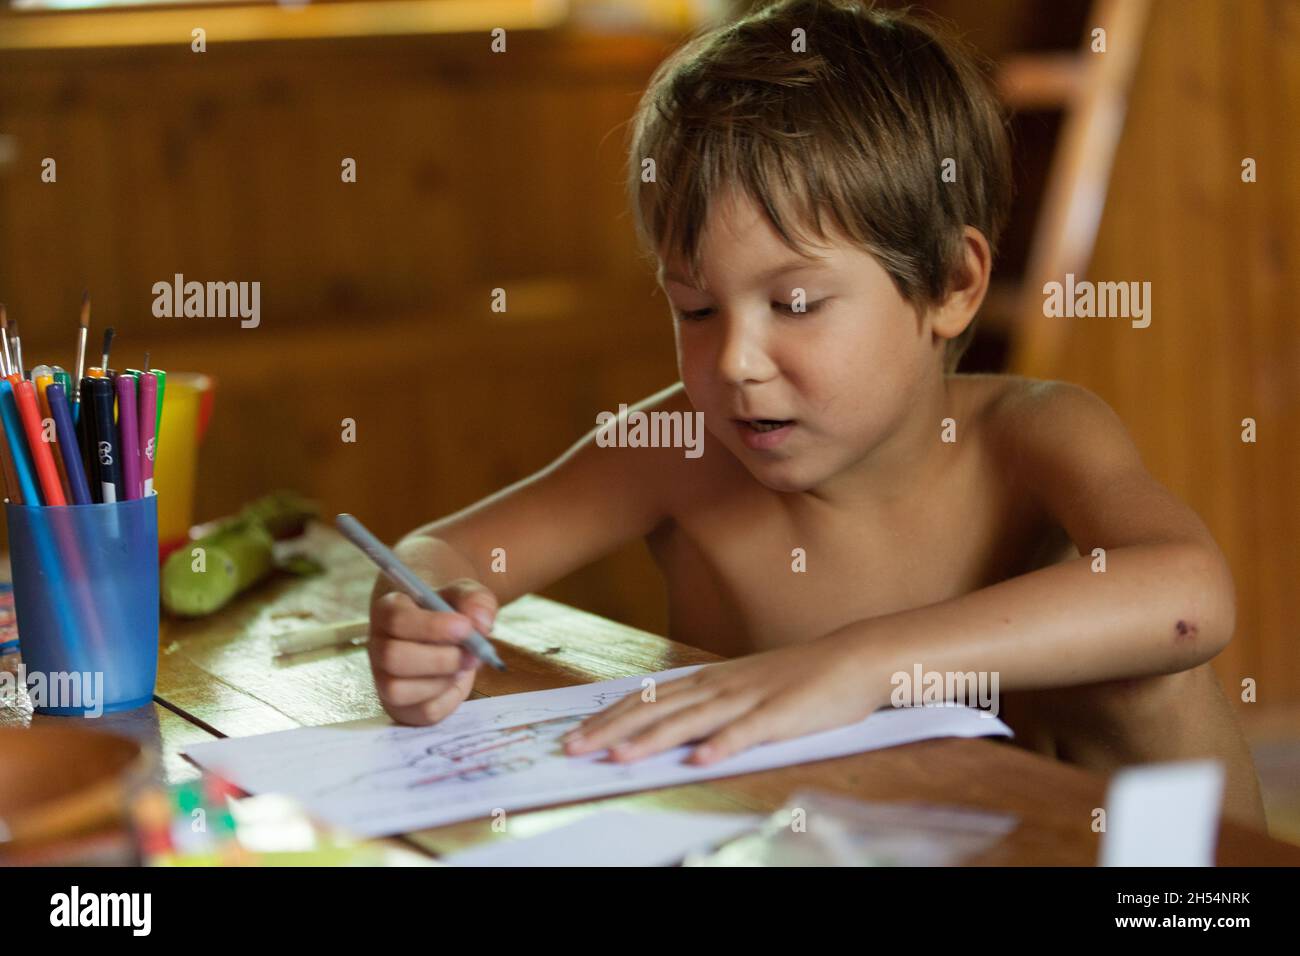 A boy is looking and singing while painting on a white paper Stock Photo